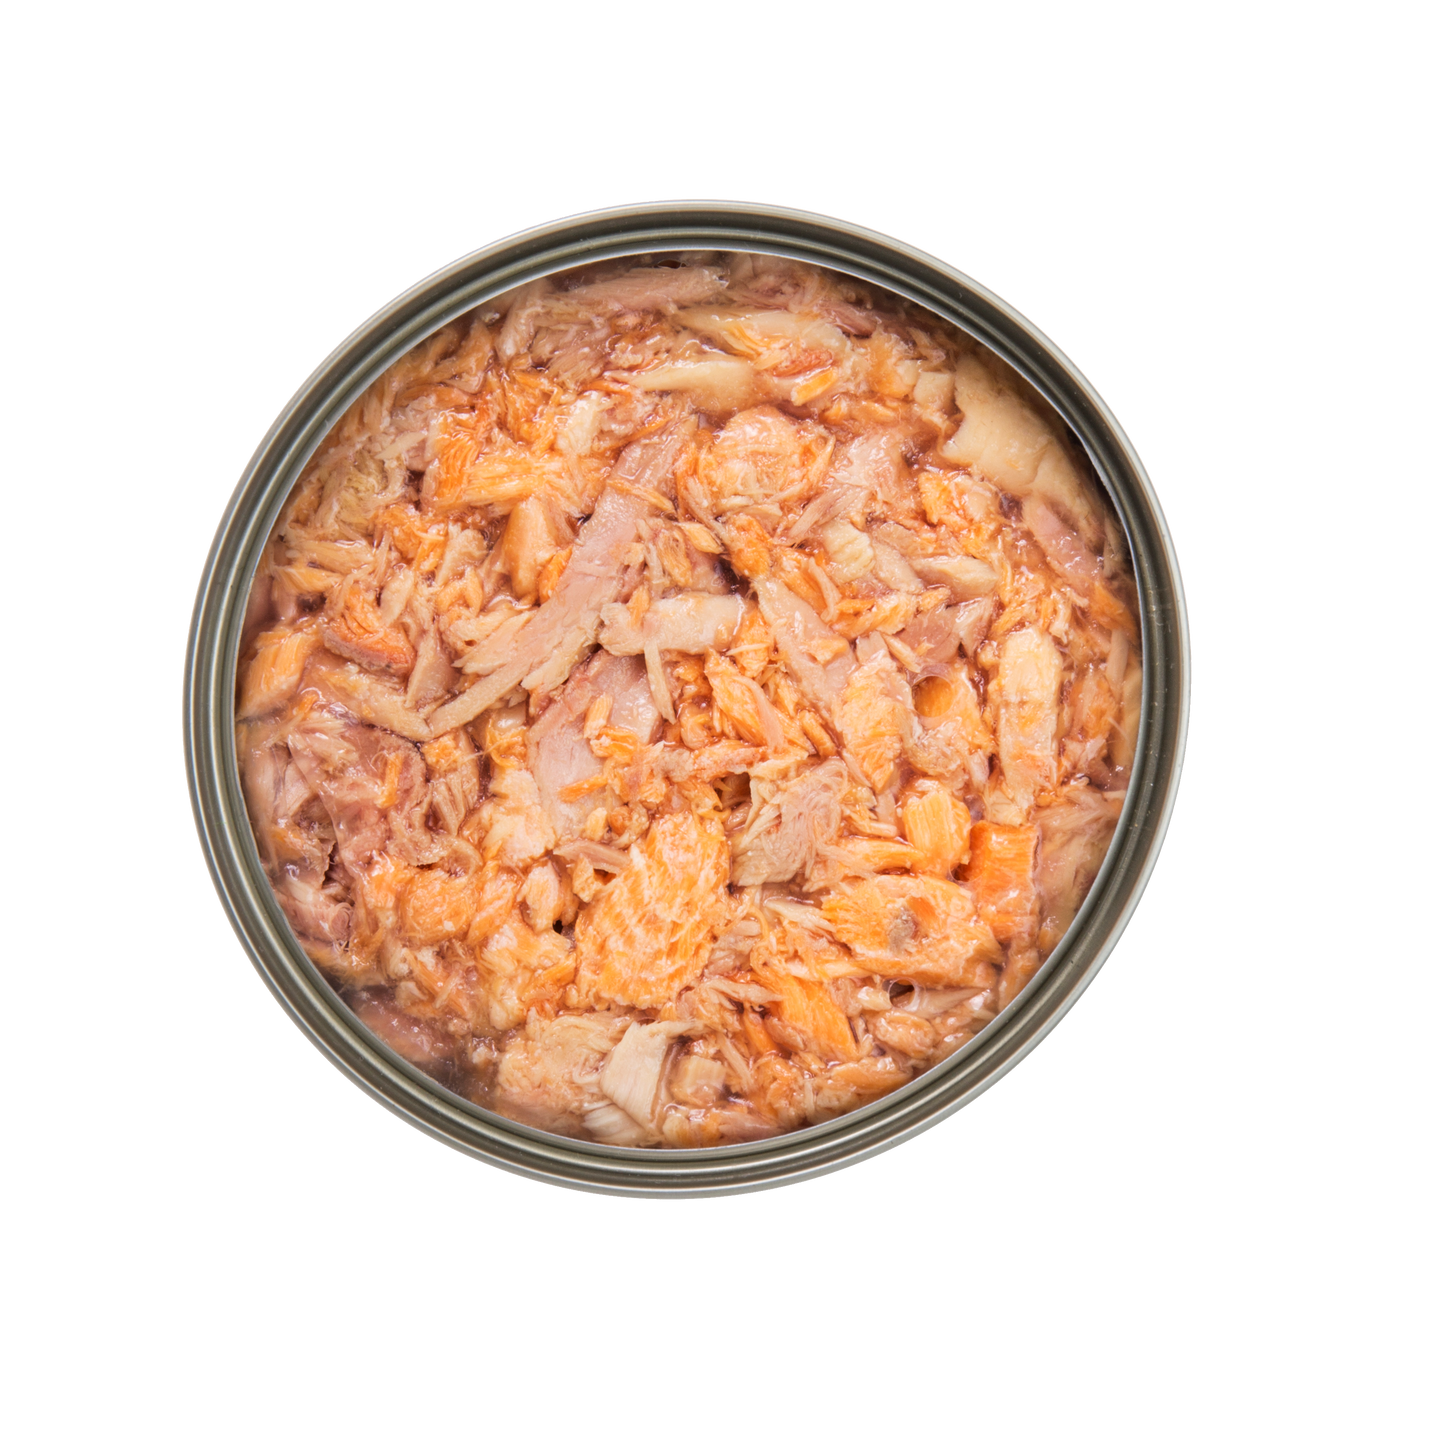 Kakato Cat and Dog Fresh Canned Salmon and Tuna 48 cans